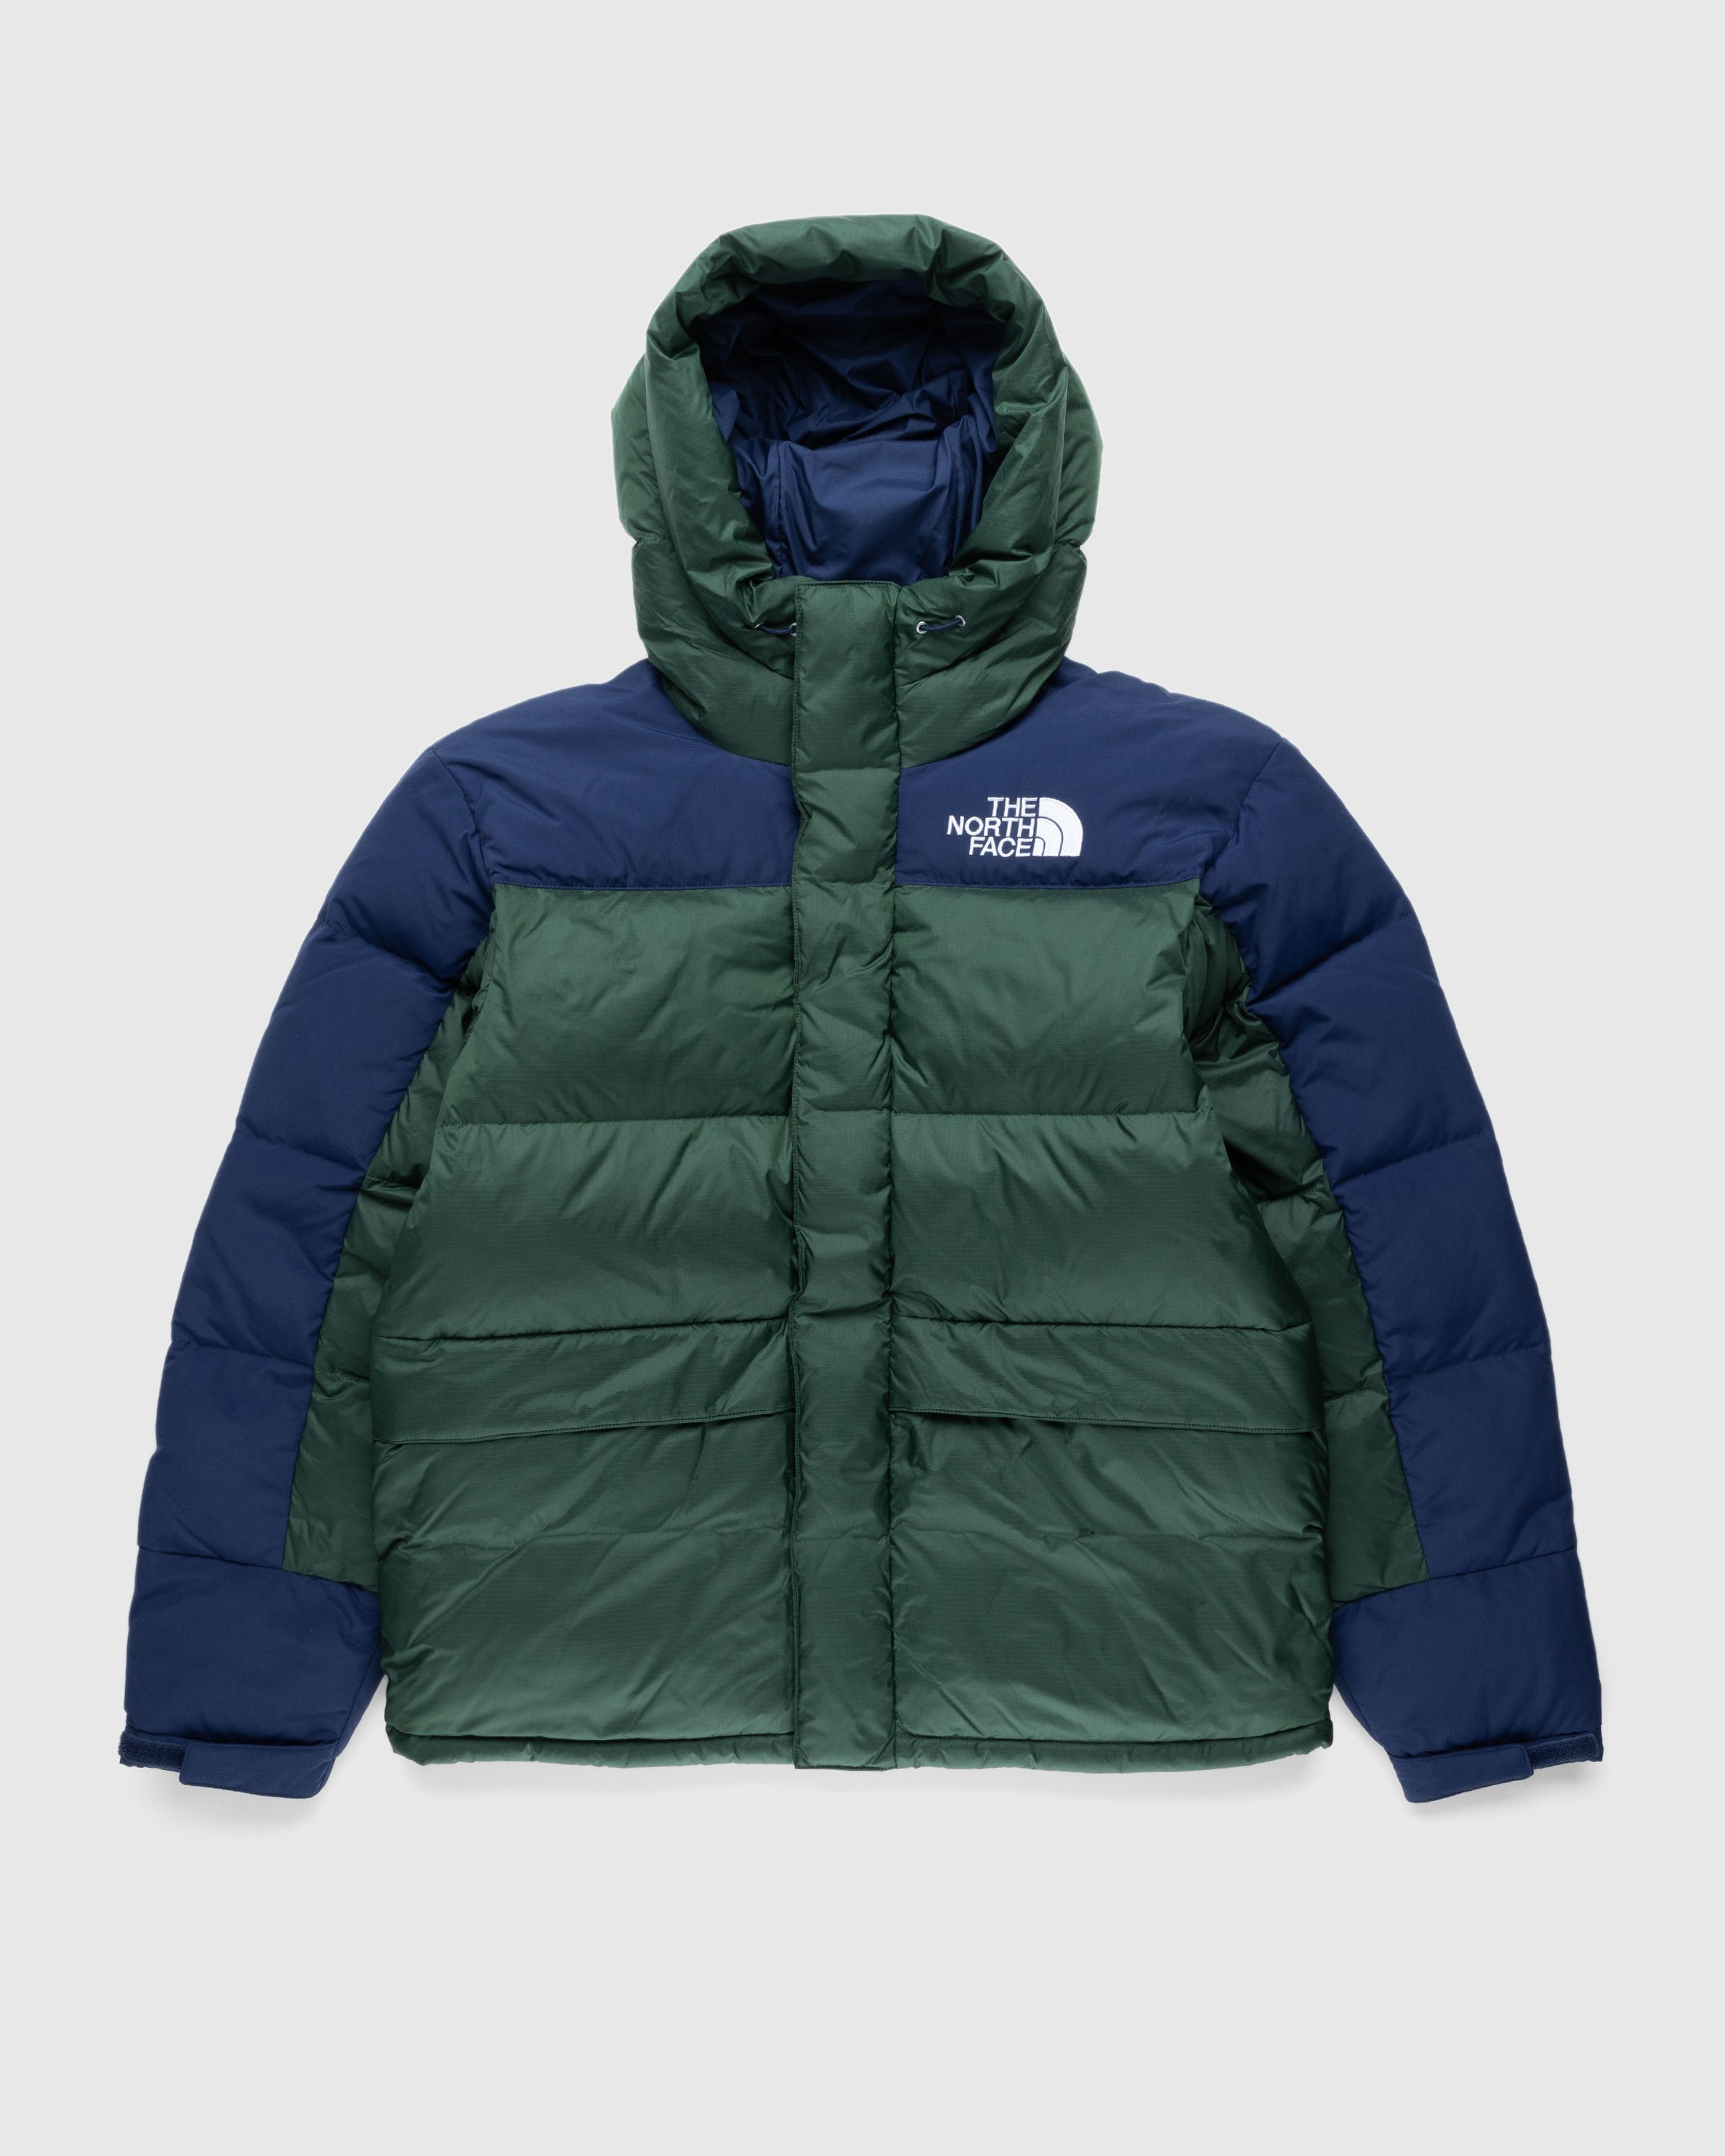 The North Face - Hmlyn Down Parka Green - Clothing - Green - Image 1